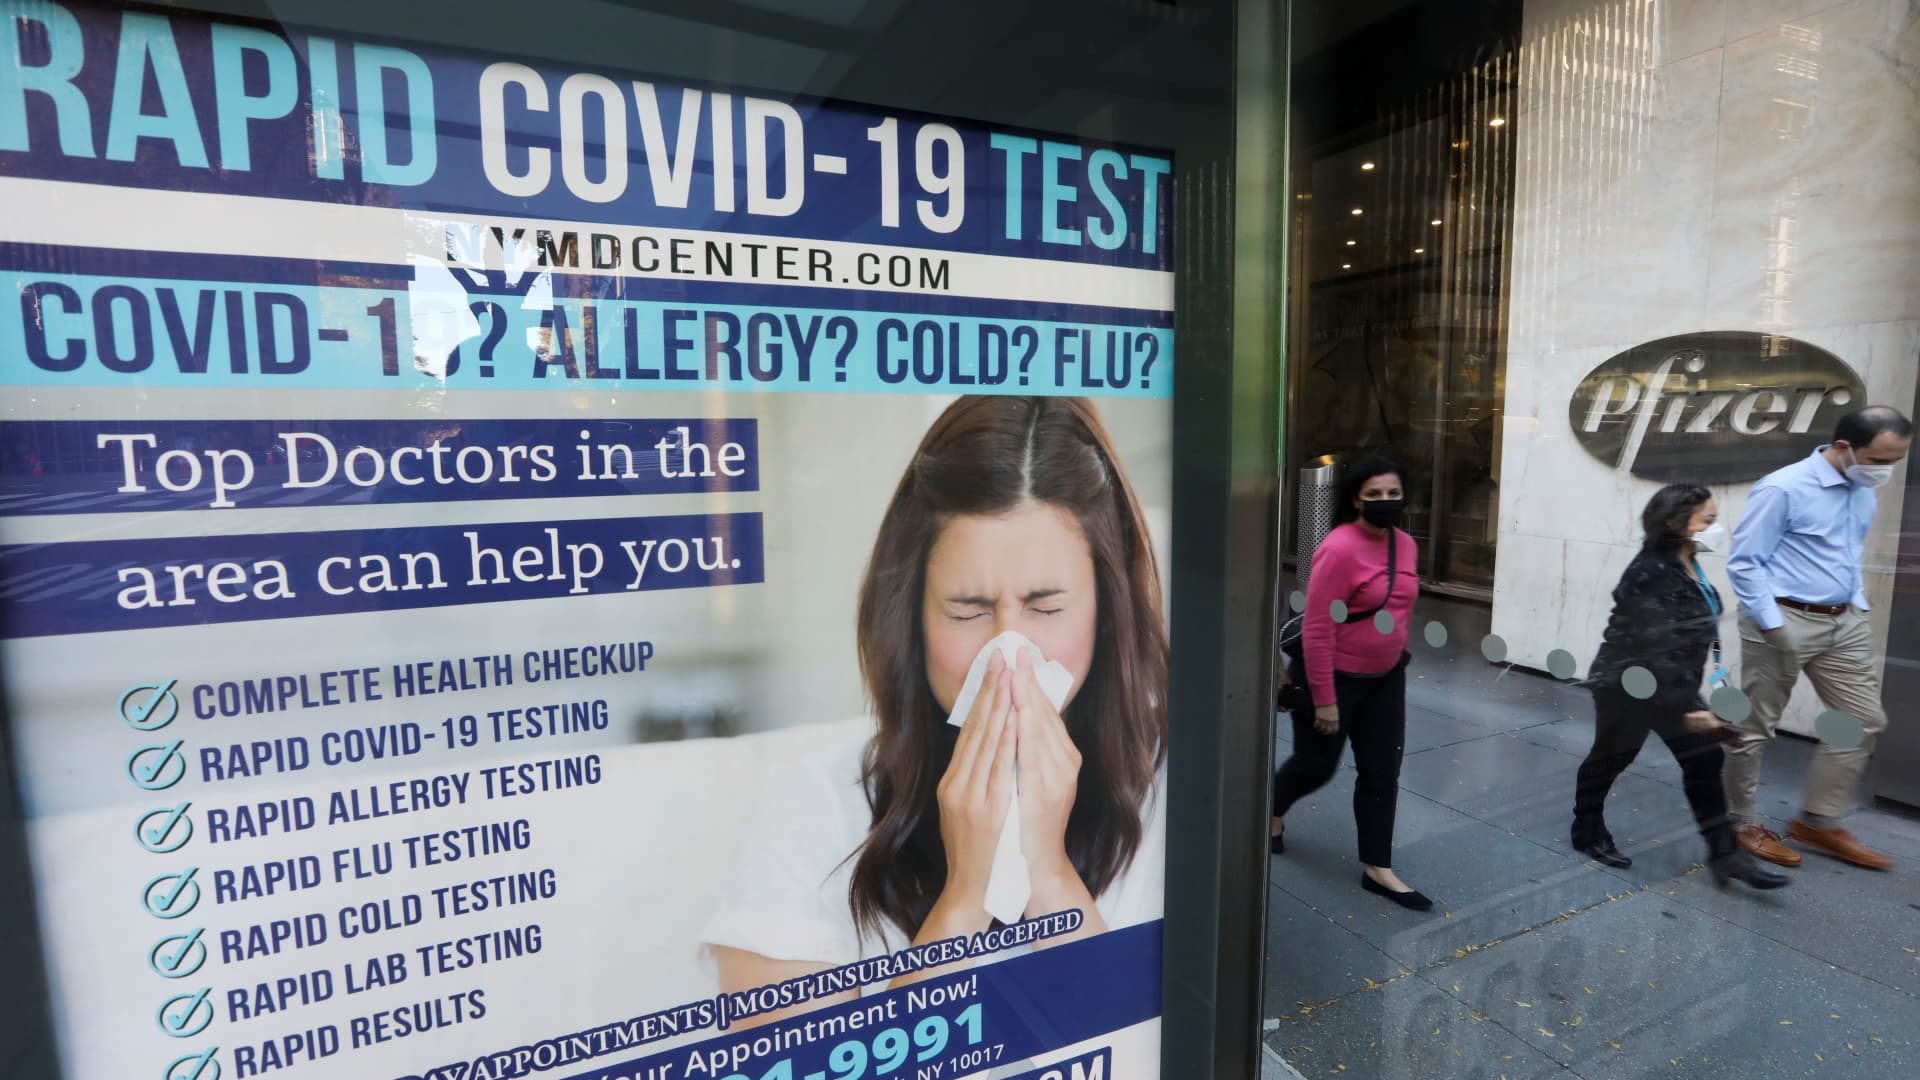 Pedestrians walk past an advertisement of COVID-19 test in New York, the United States, Nov. 9, 2020.